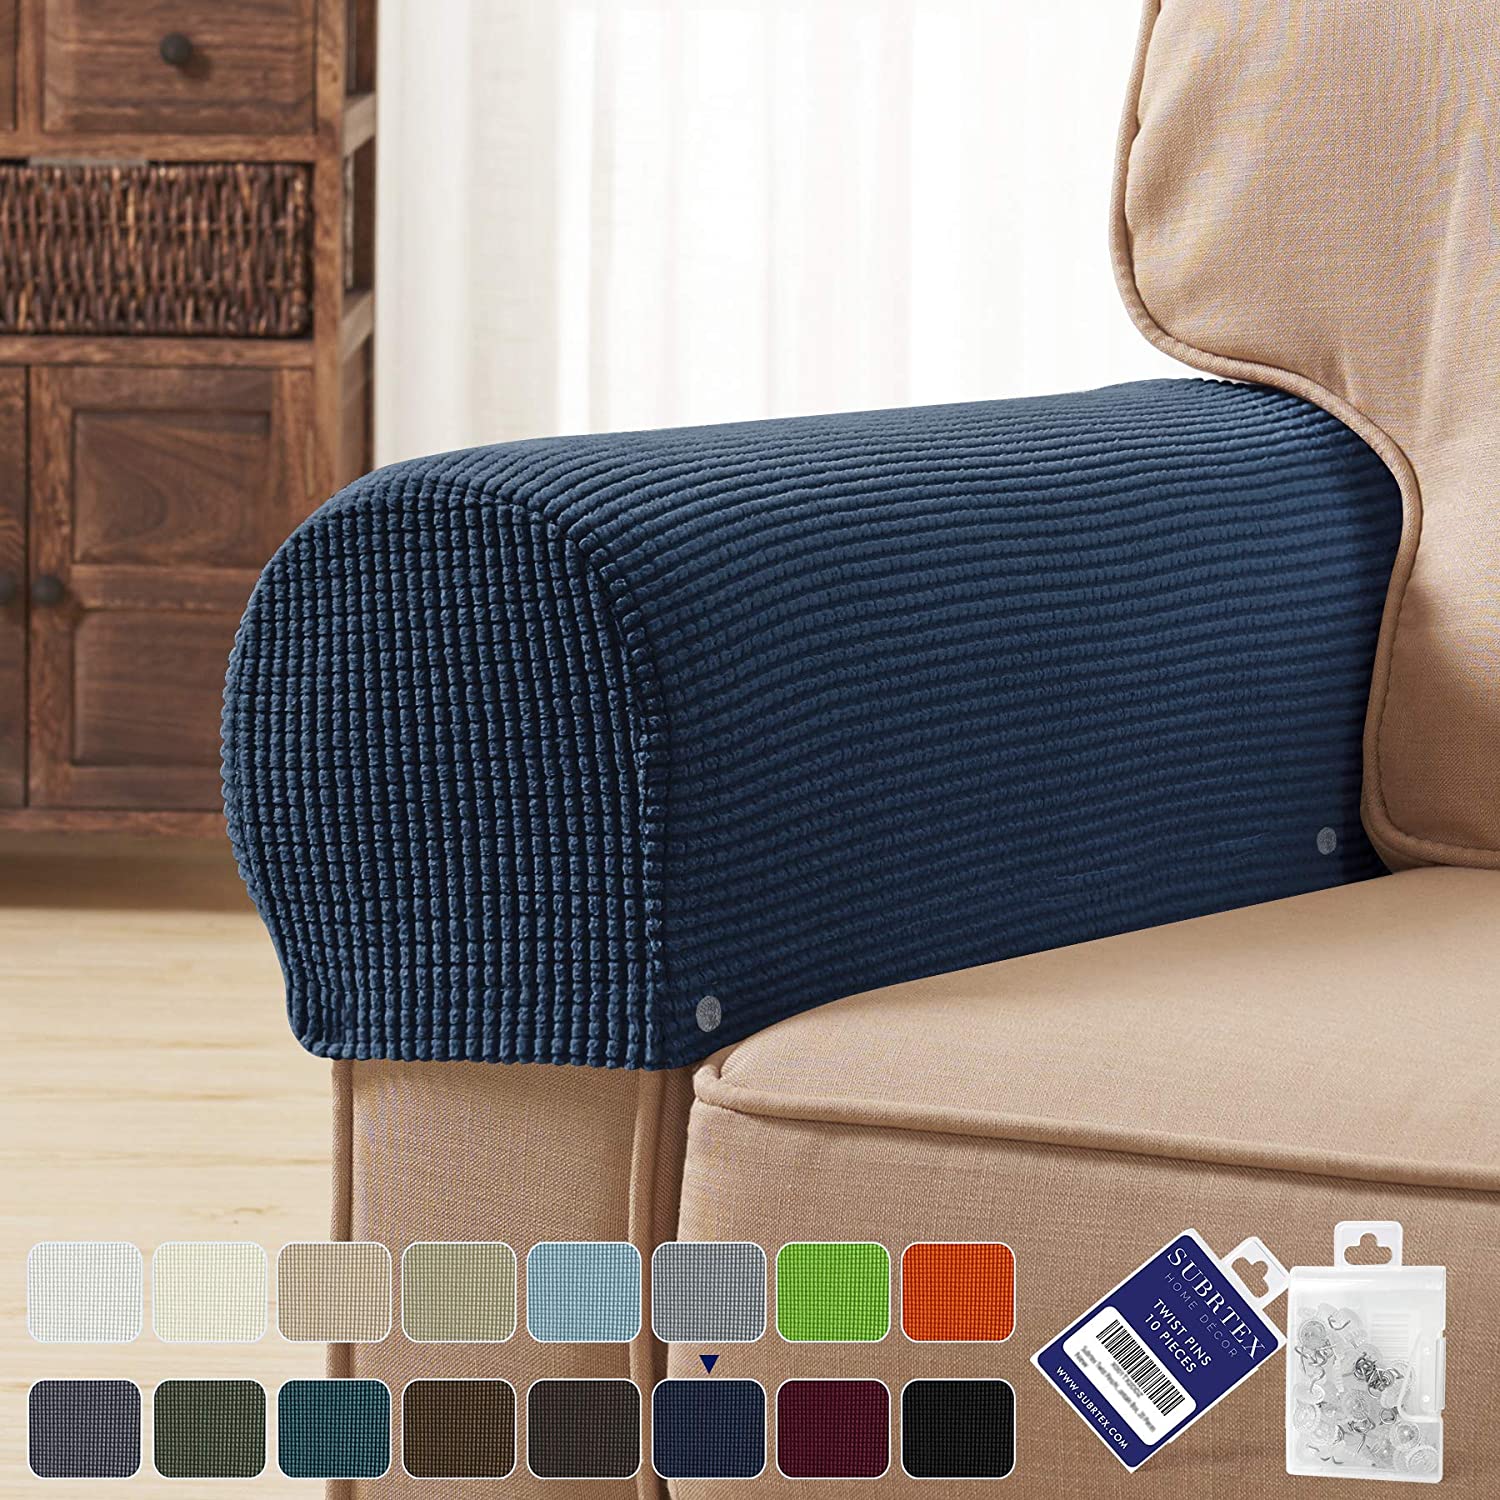 Details about   subrtex Spandex Stretch Fabric Armrest Covers Anti-Slip Furniture Protector Armc